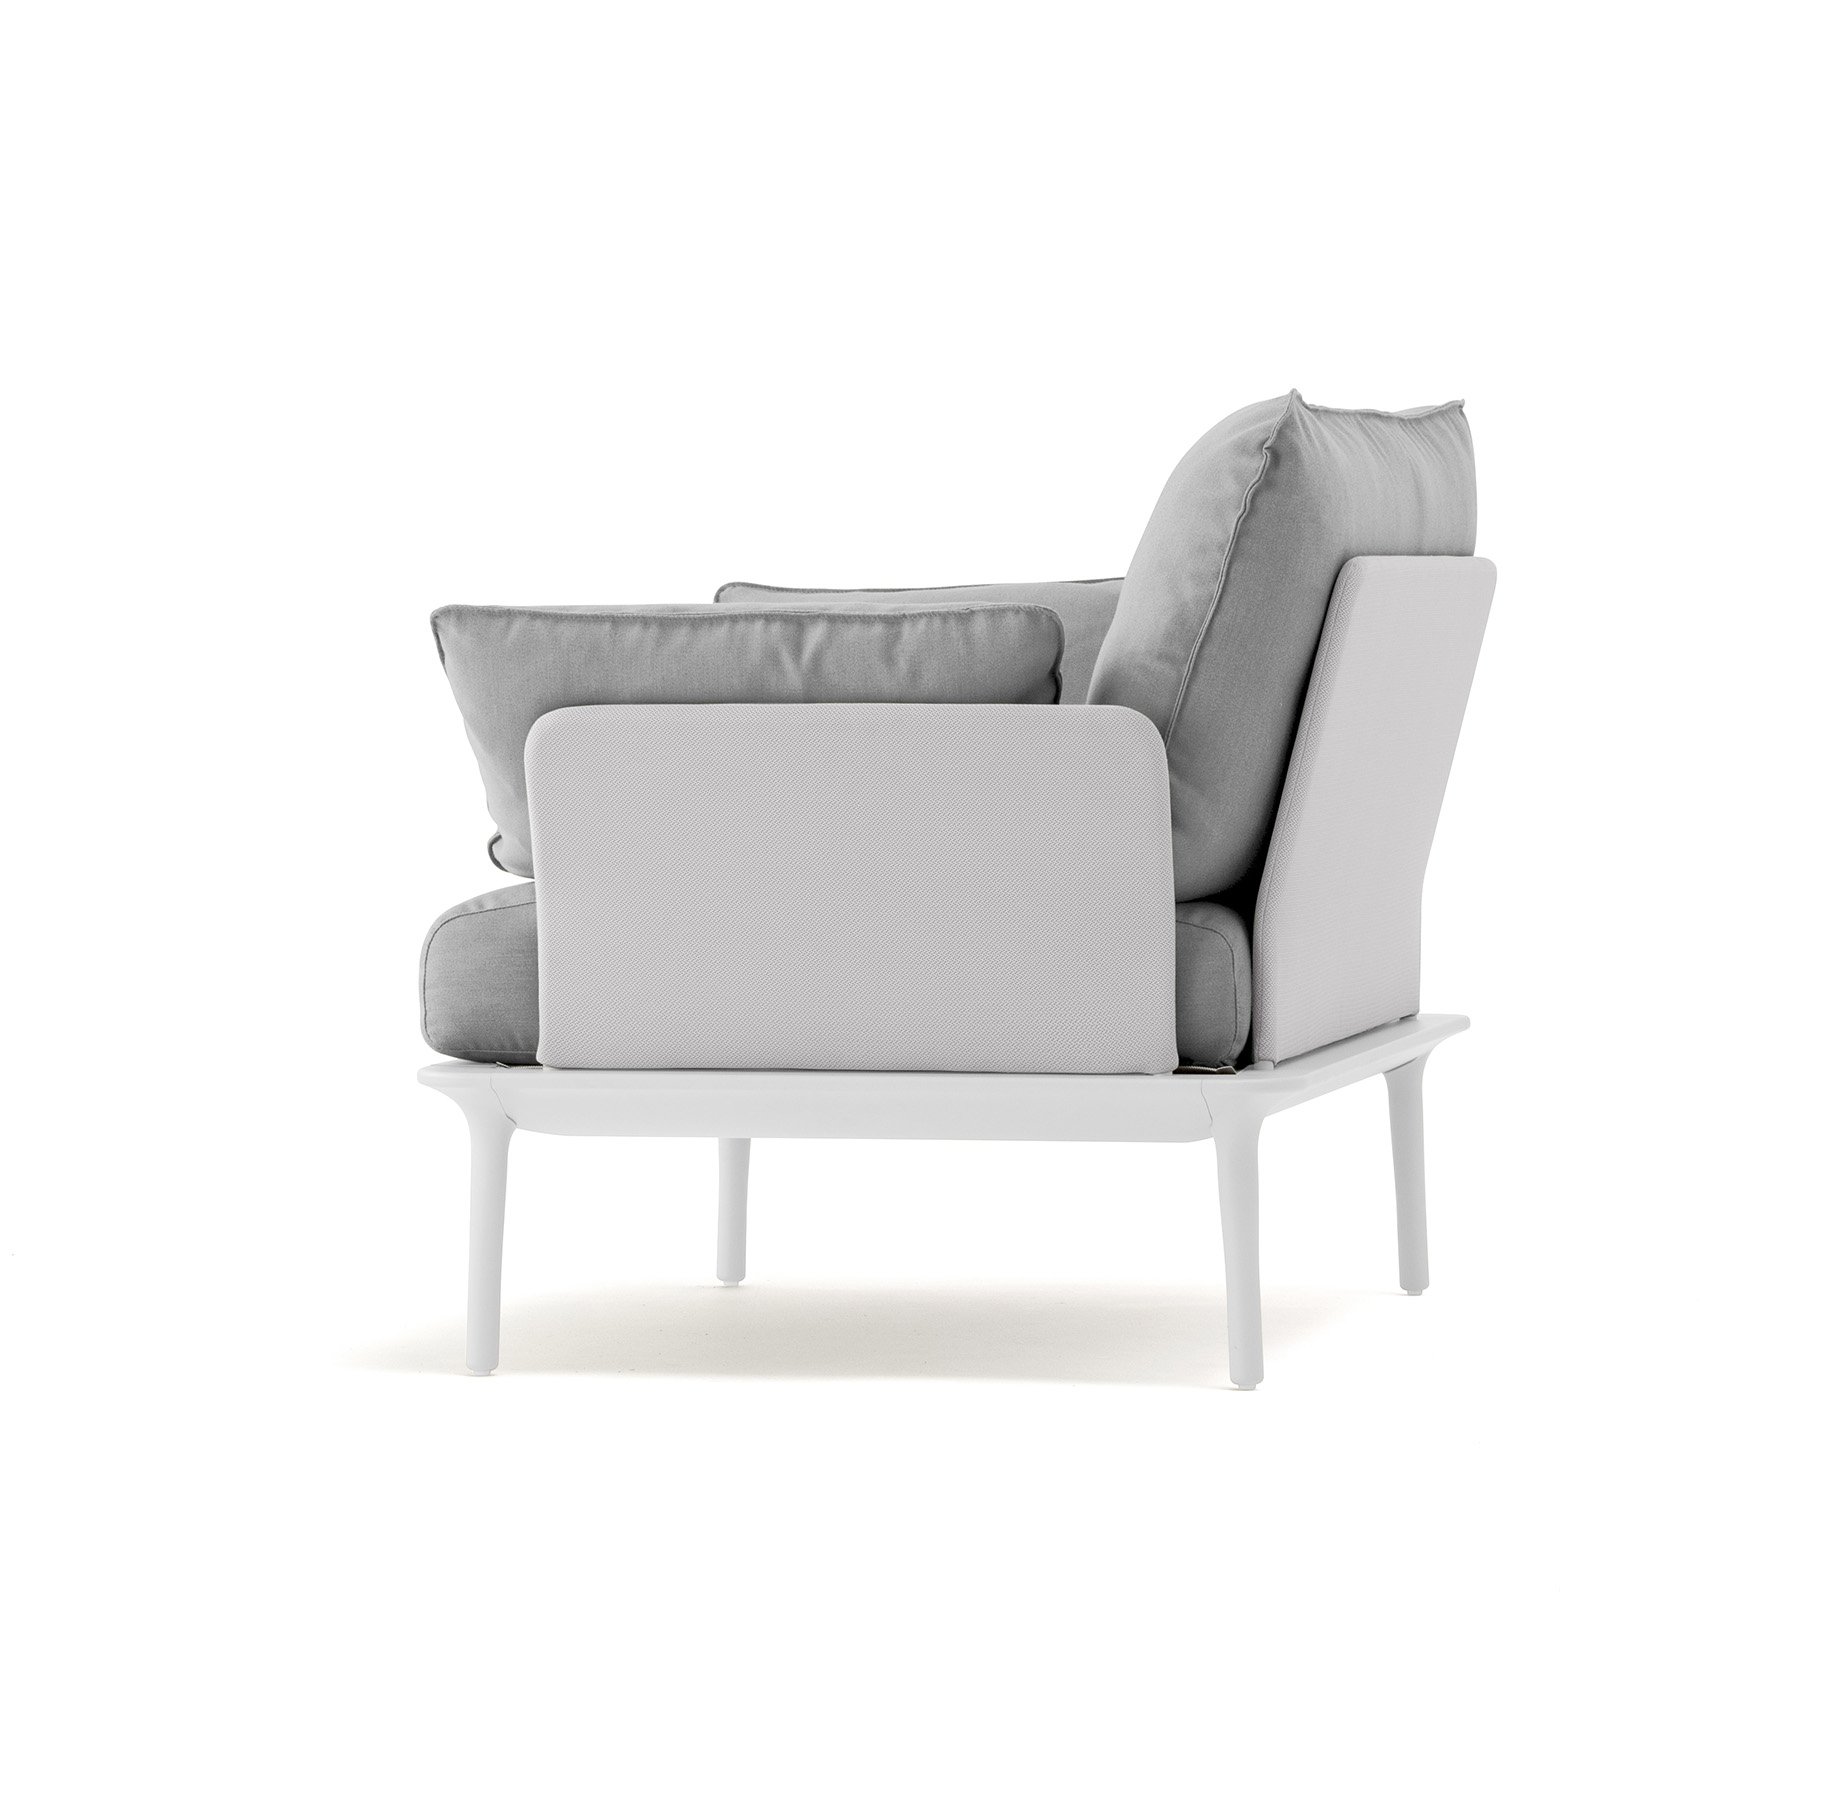 Reva Lounge Chair from Pedrali, designed by Patrick Jouin